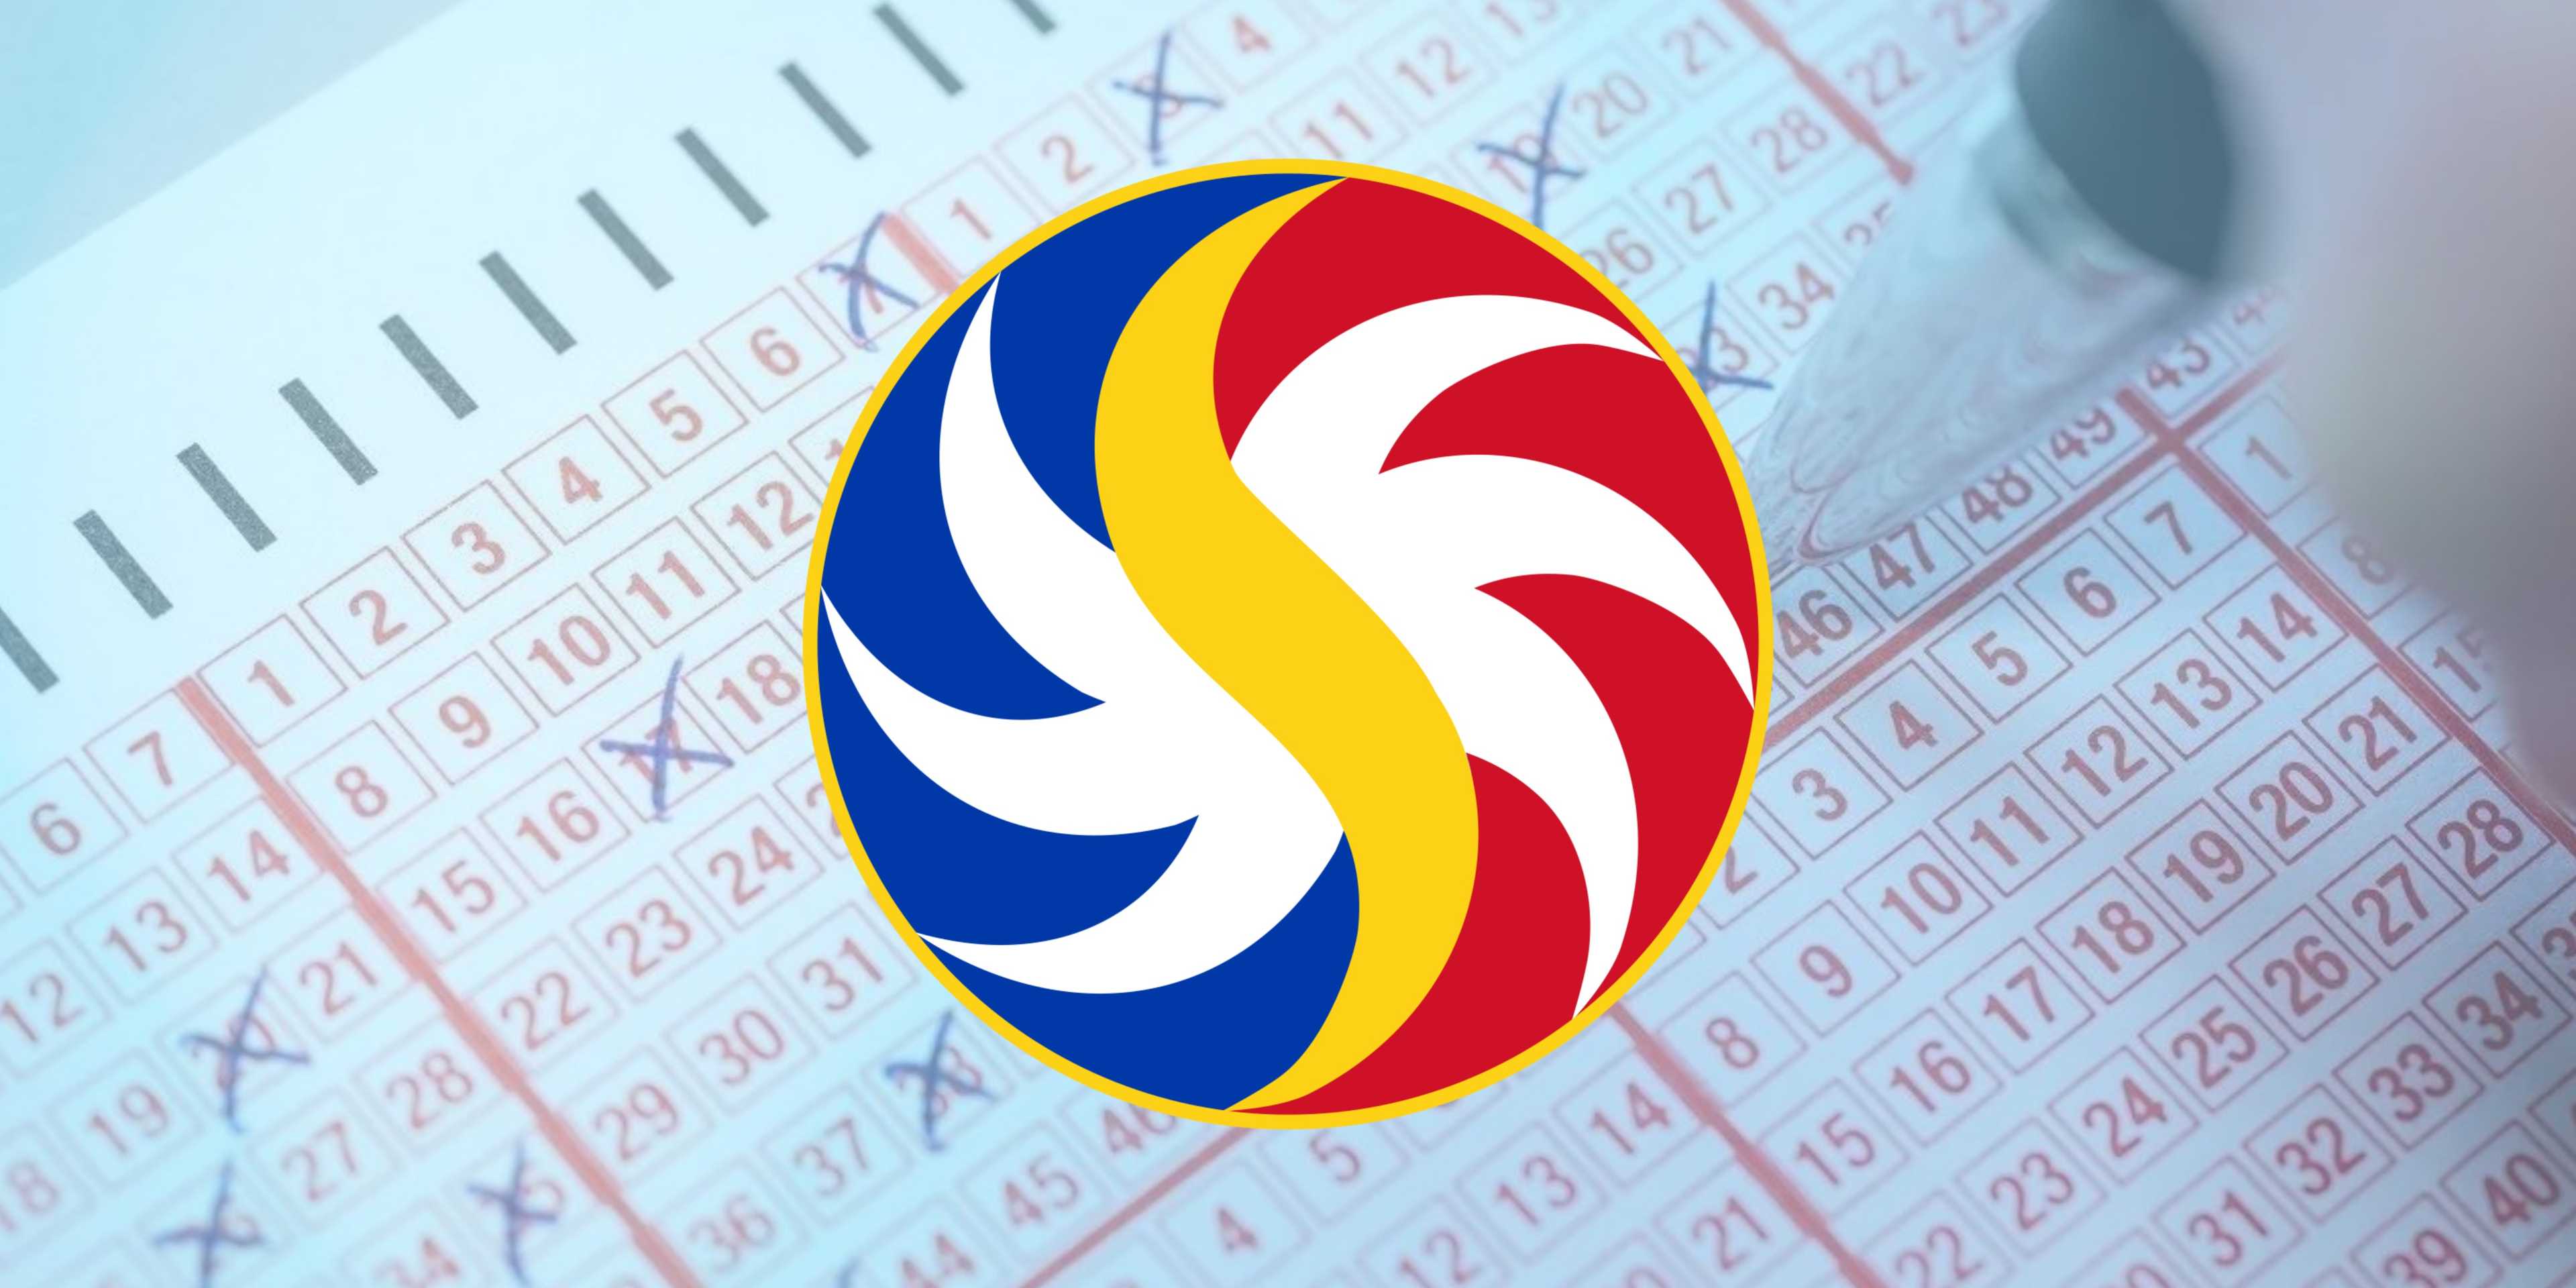 PCSO Lotto Draw Results on Friday, February 2